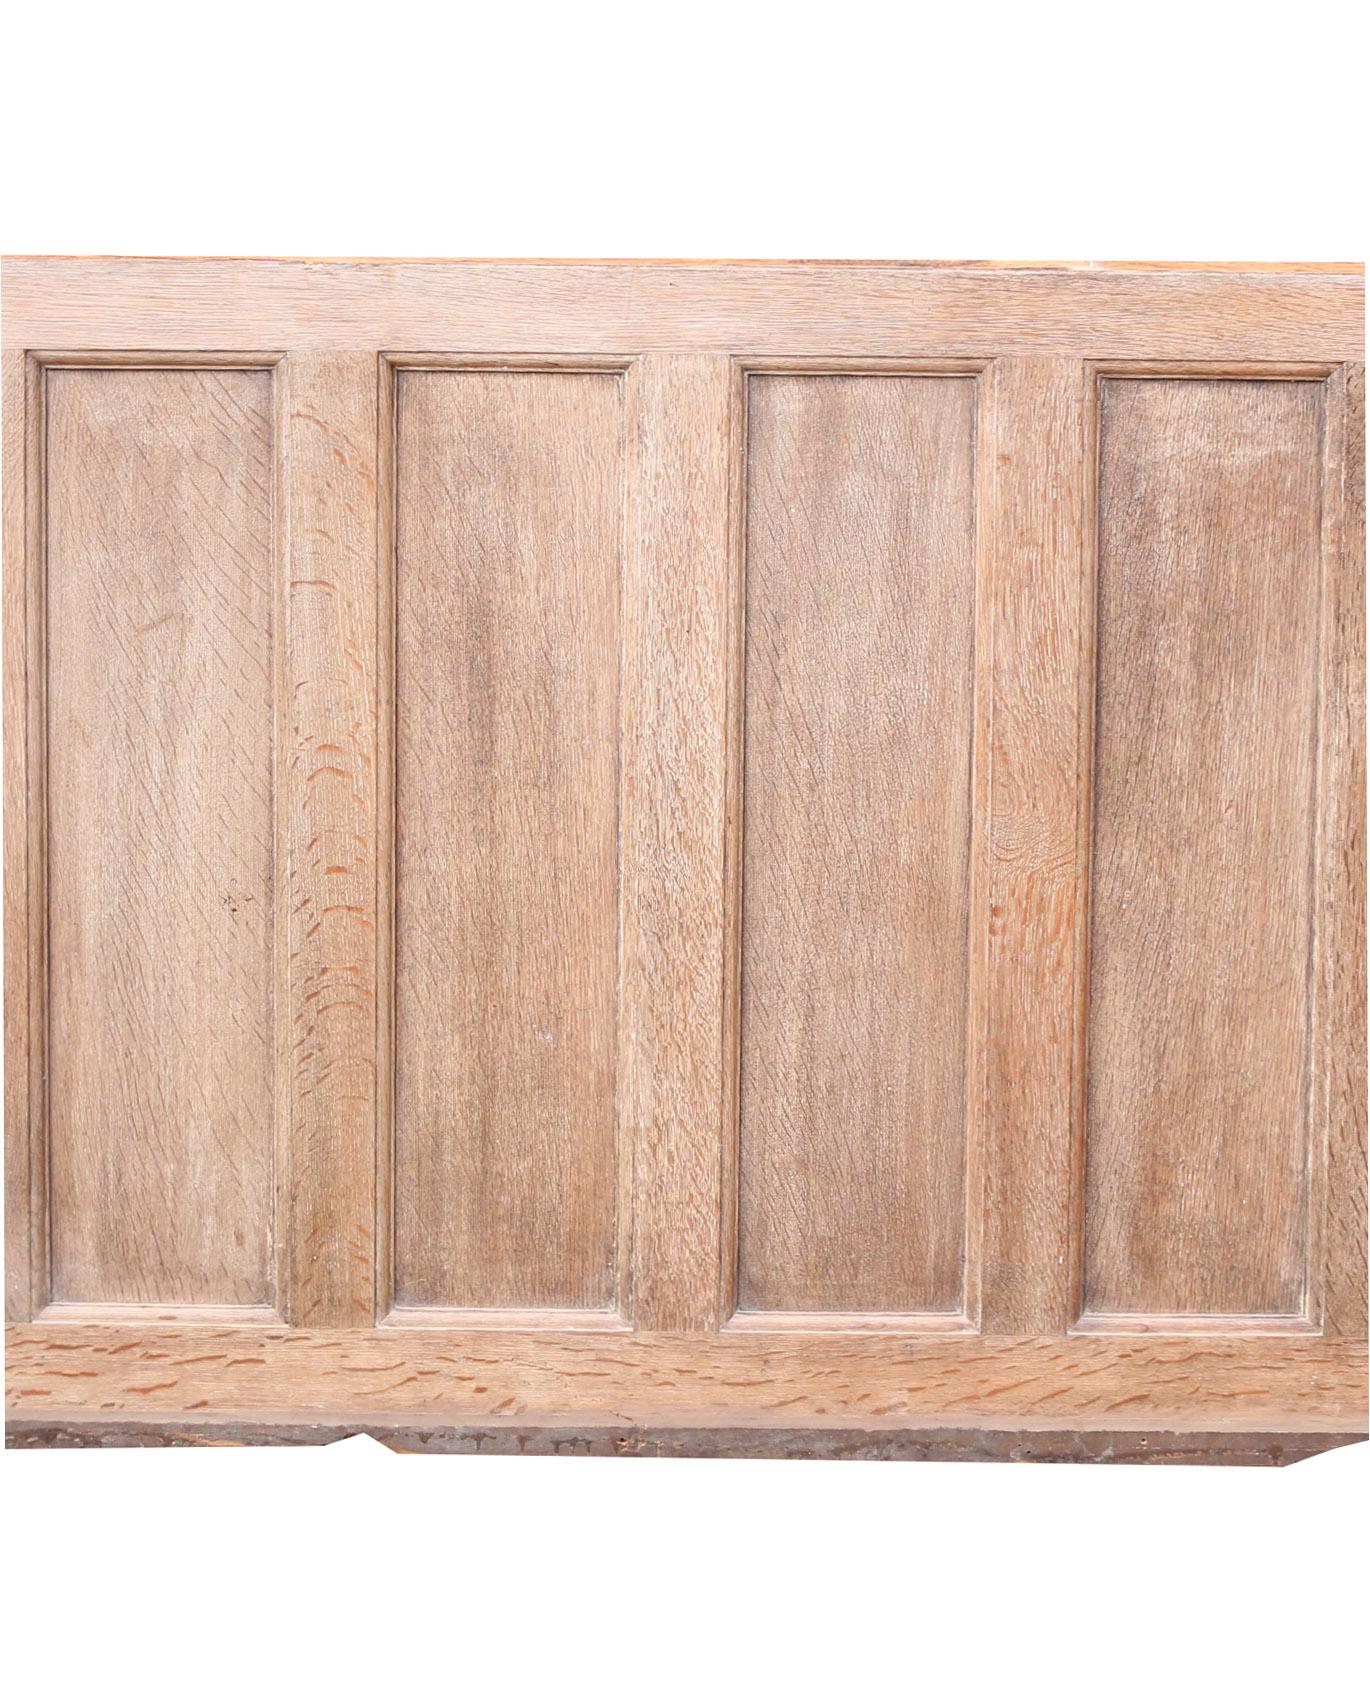 19th Century Victorian Limed Oak Wall Panelling